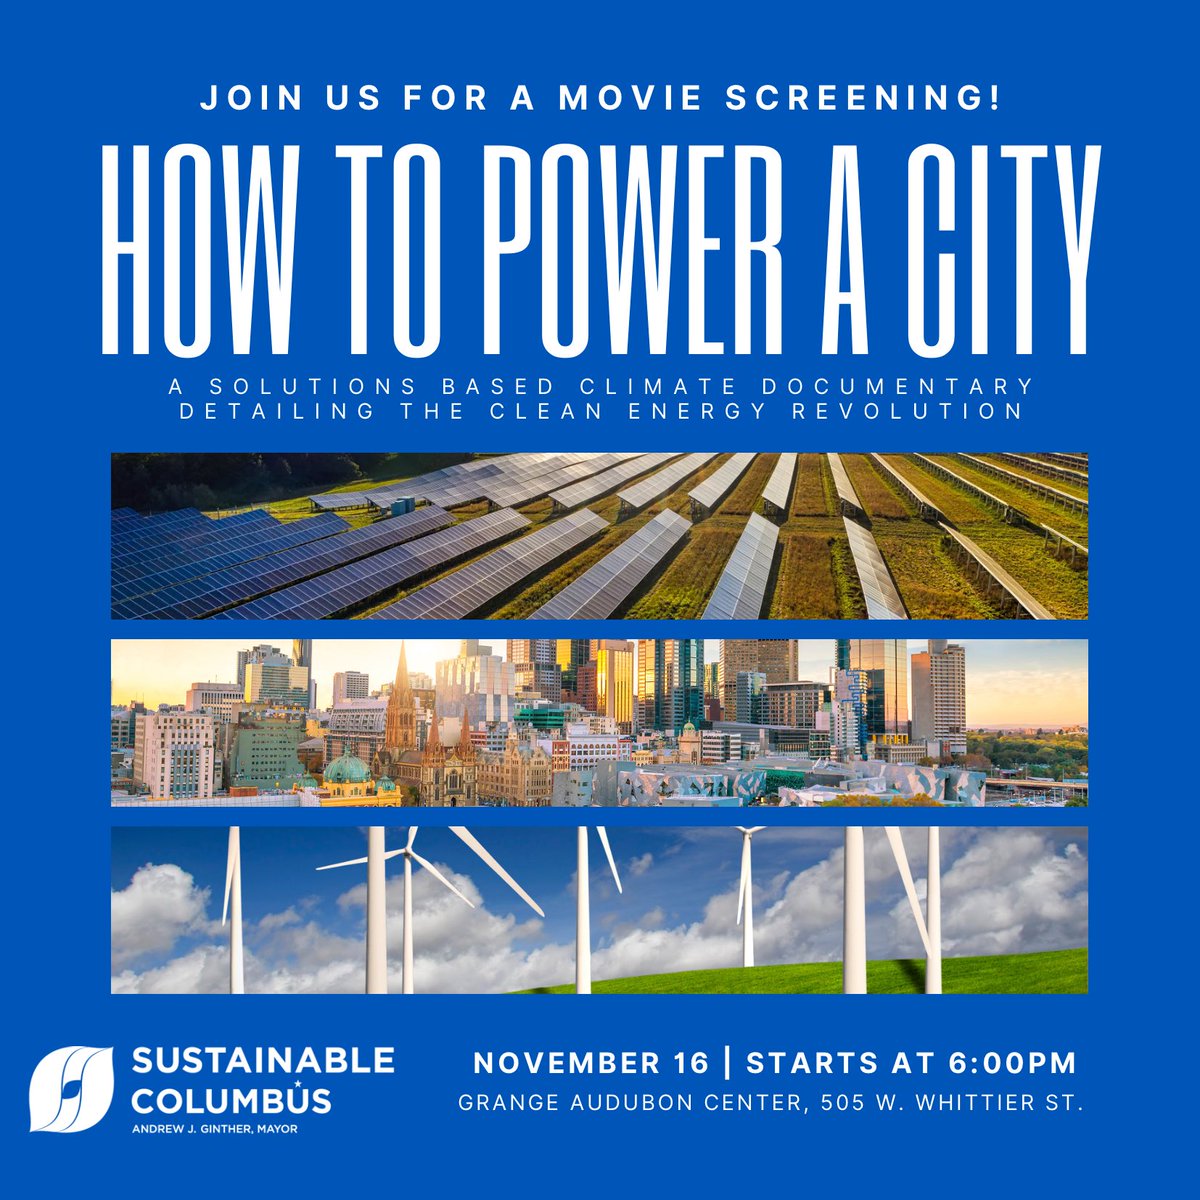 Join us Nov 16th! We’re screening the clean energy documentary How to Power a City @GrangeAudubonOH and will host a panel discussion afterwards to discuss the Columbus landscape. This event is FREE but RSVP’s are encouraged! tinyurl.com/PowerACityCbus